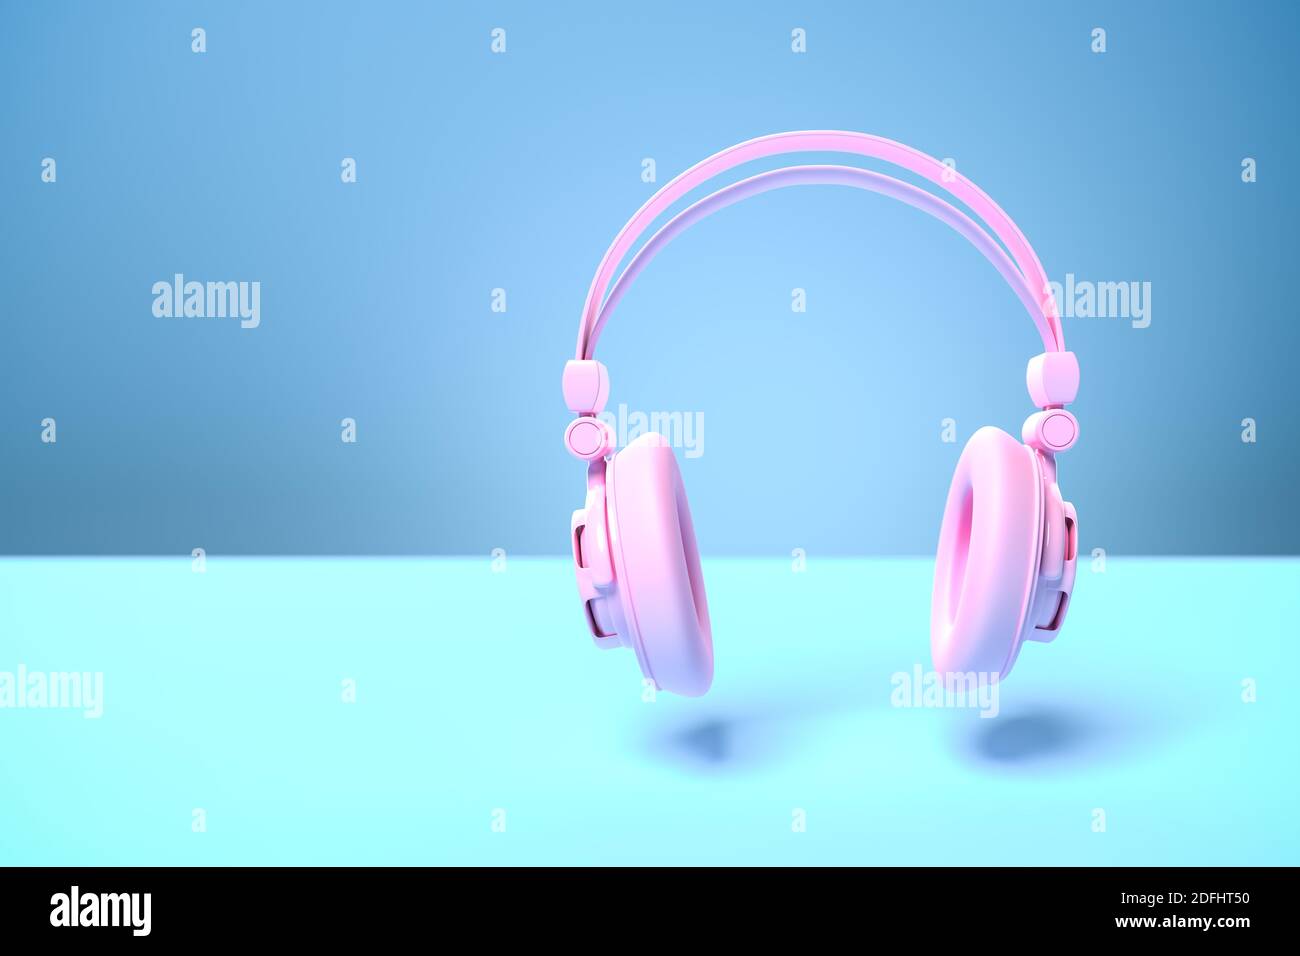 Music concept: A pink headphone against a blue background with shadow. Copy space - selective focus on foreground Stock Photo